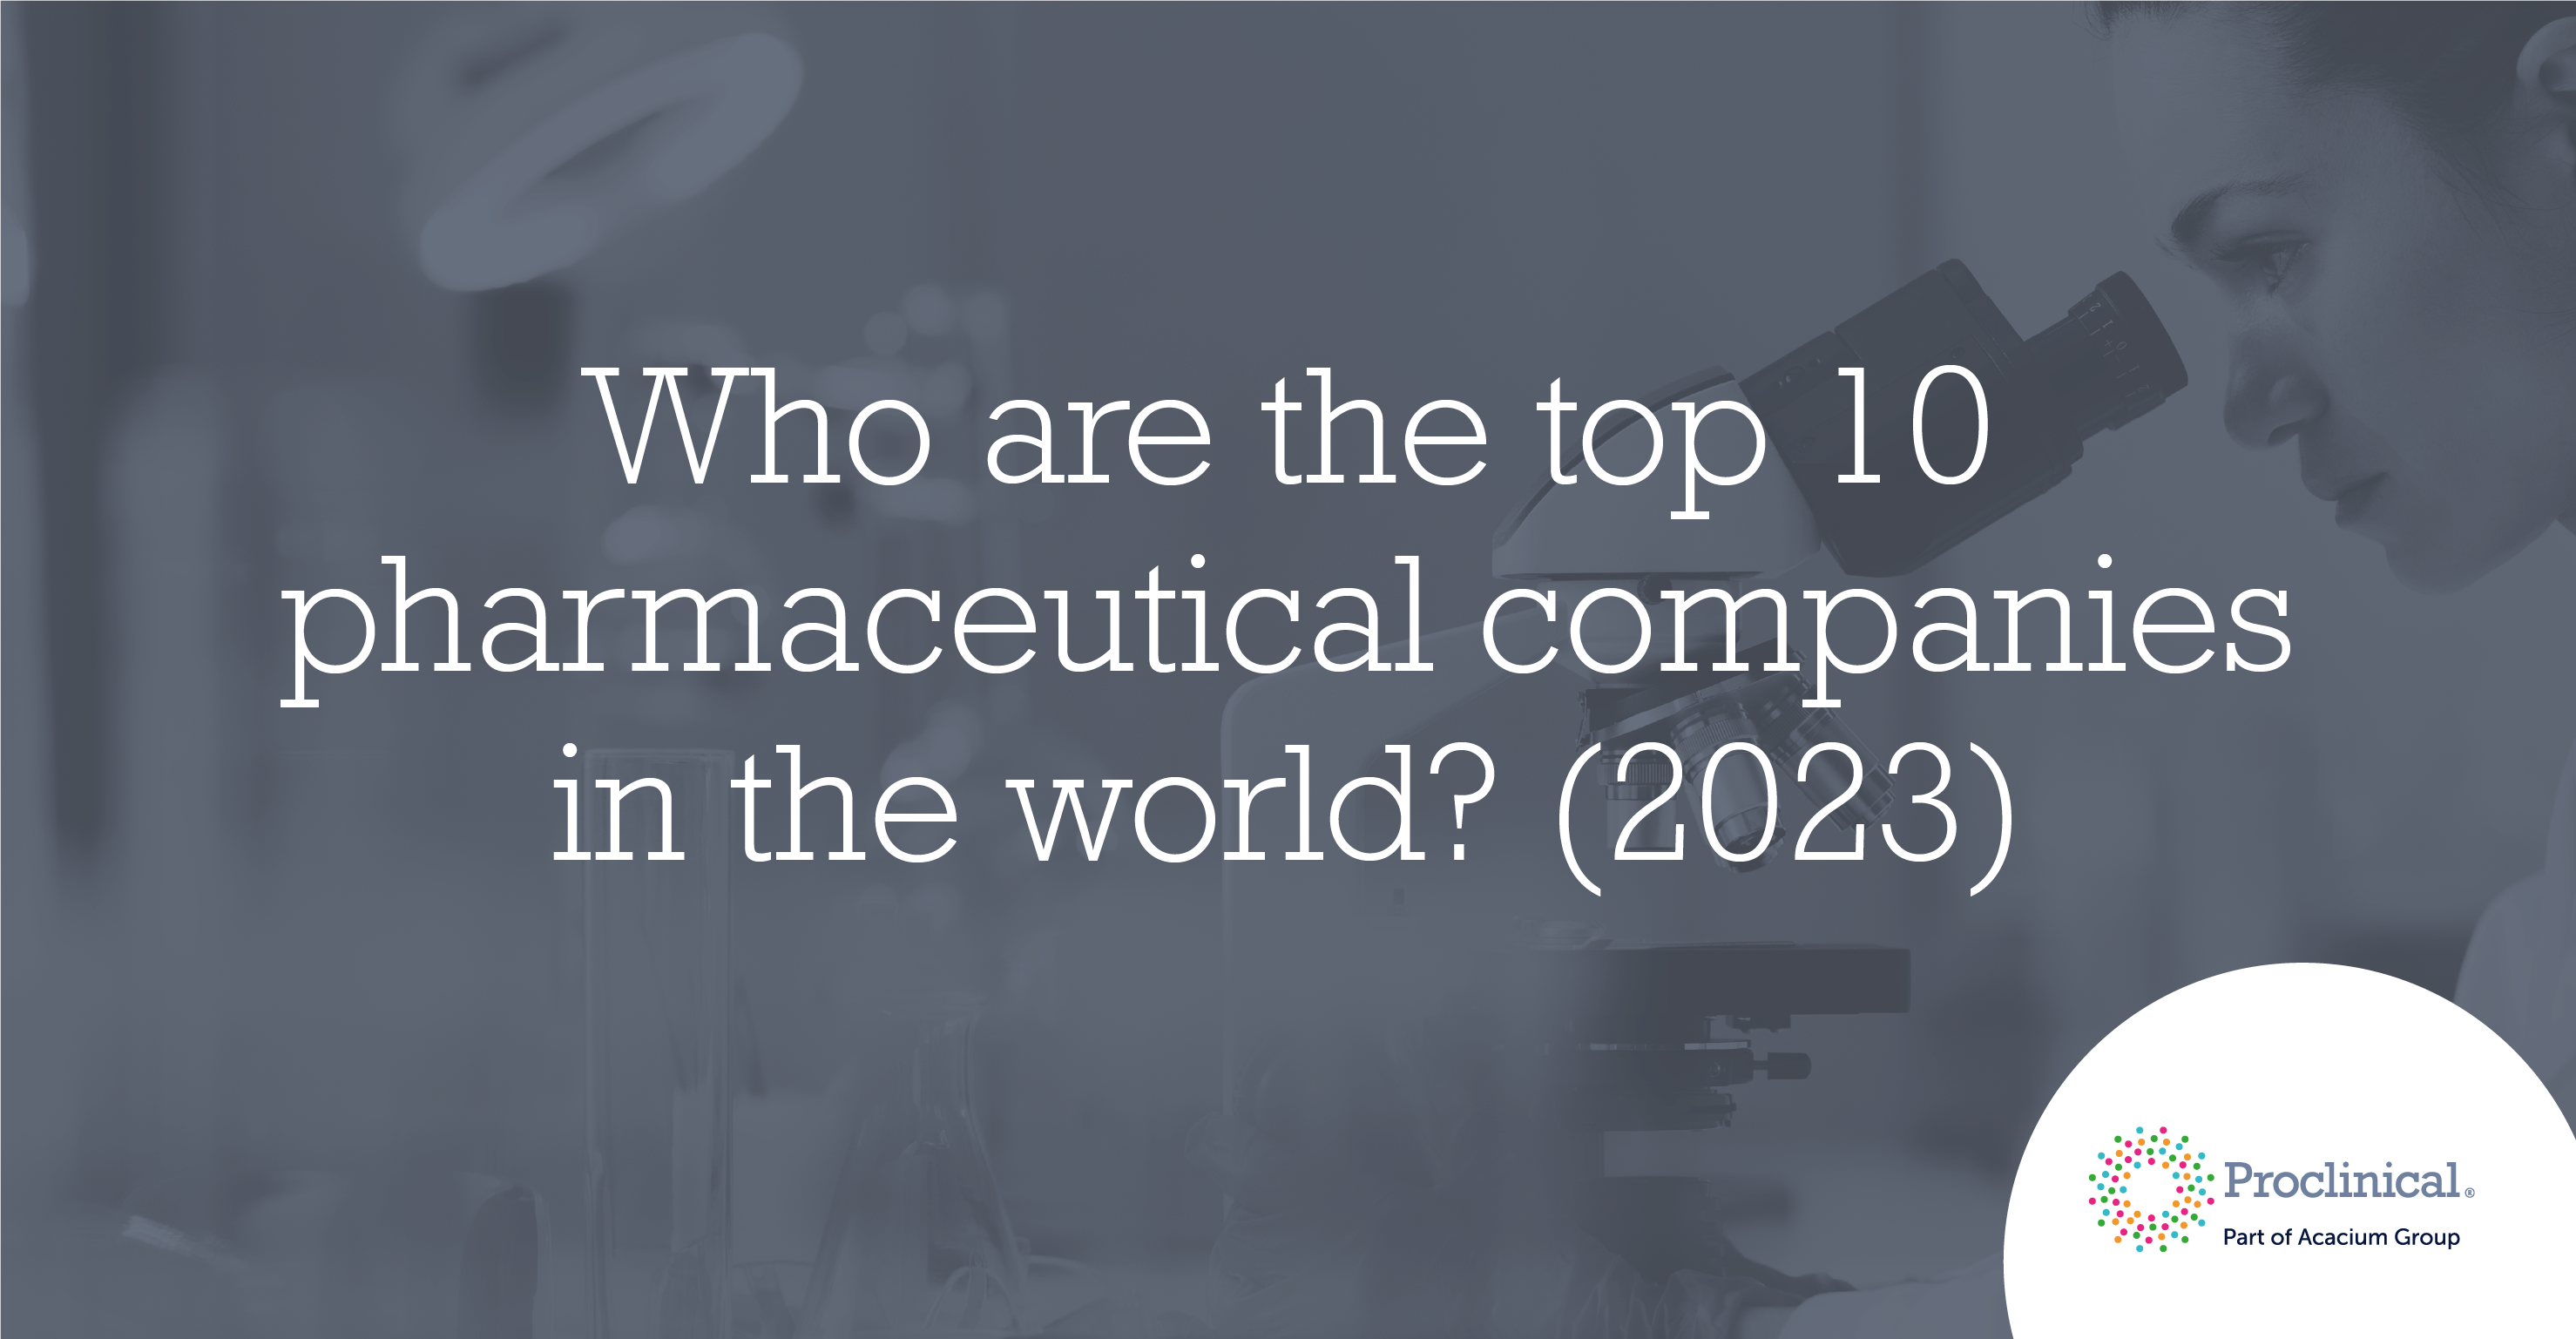 50 of 2021's best-selling pharmaceuticals